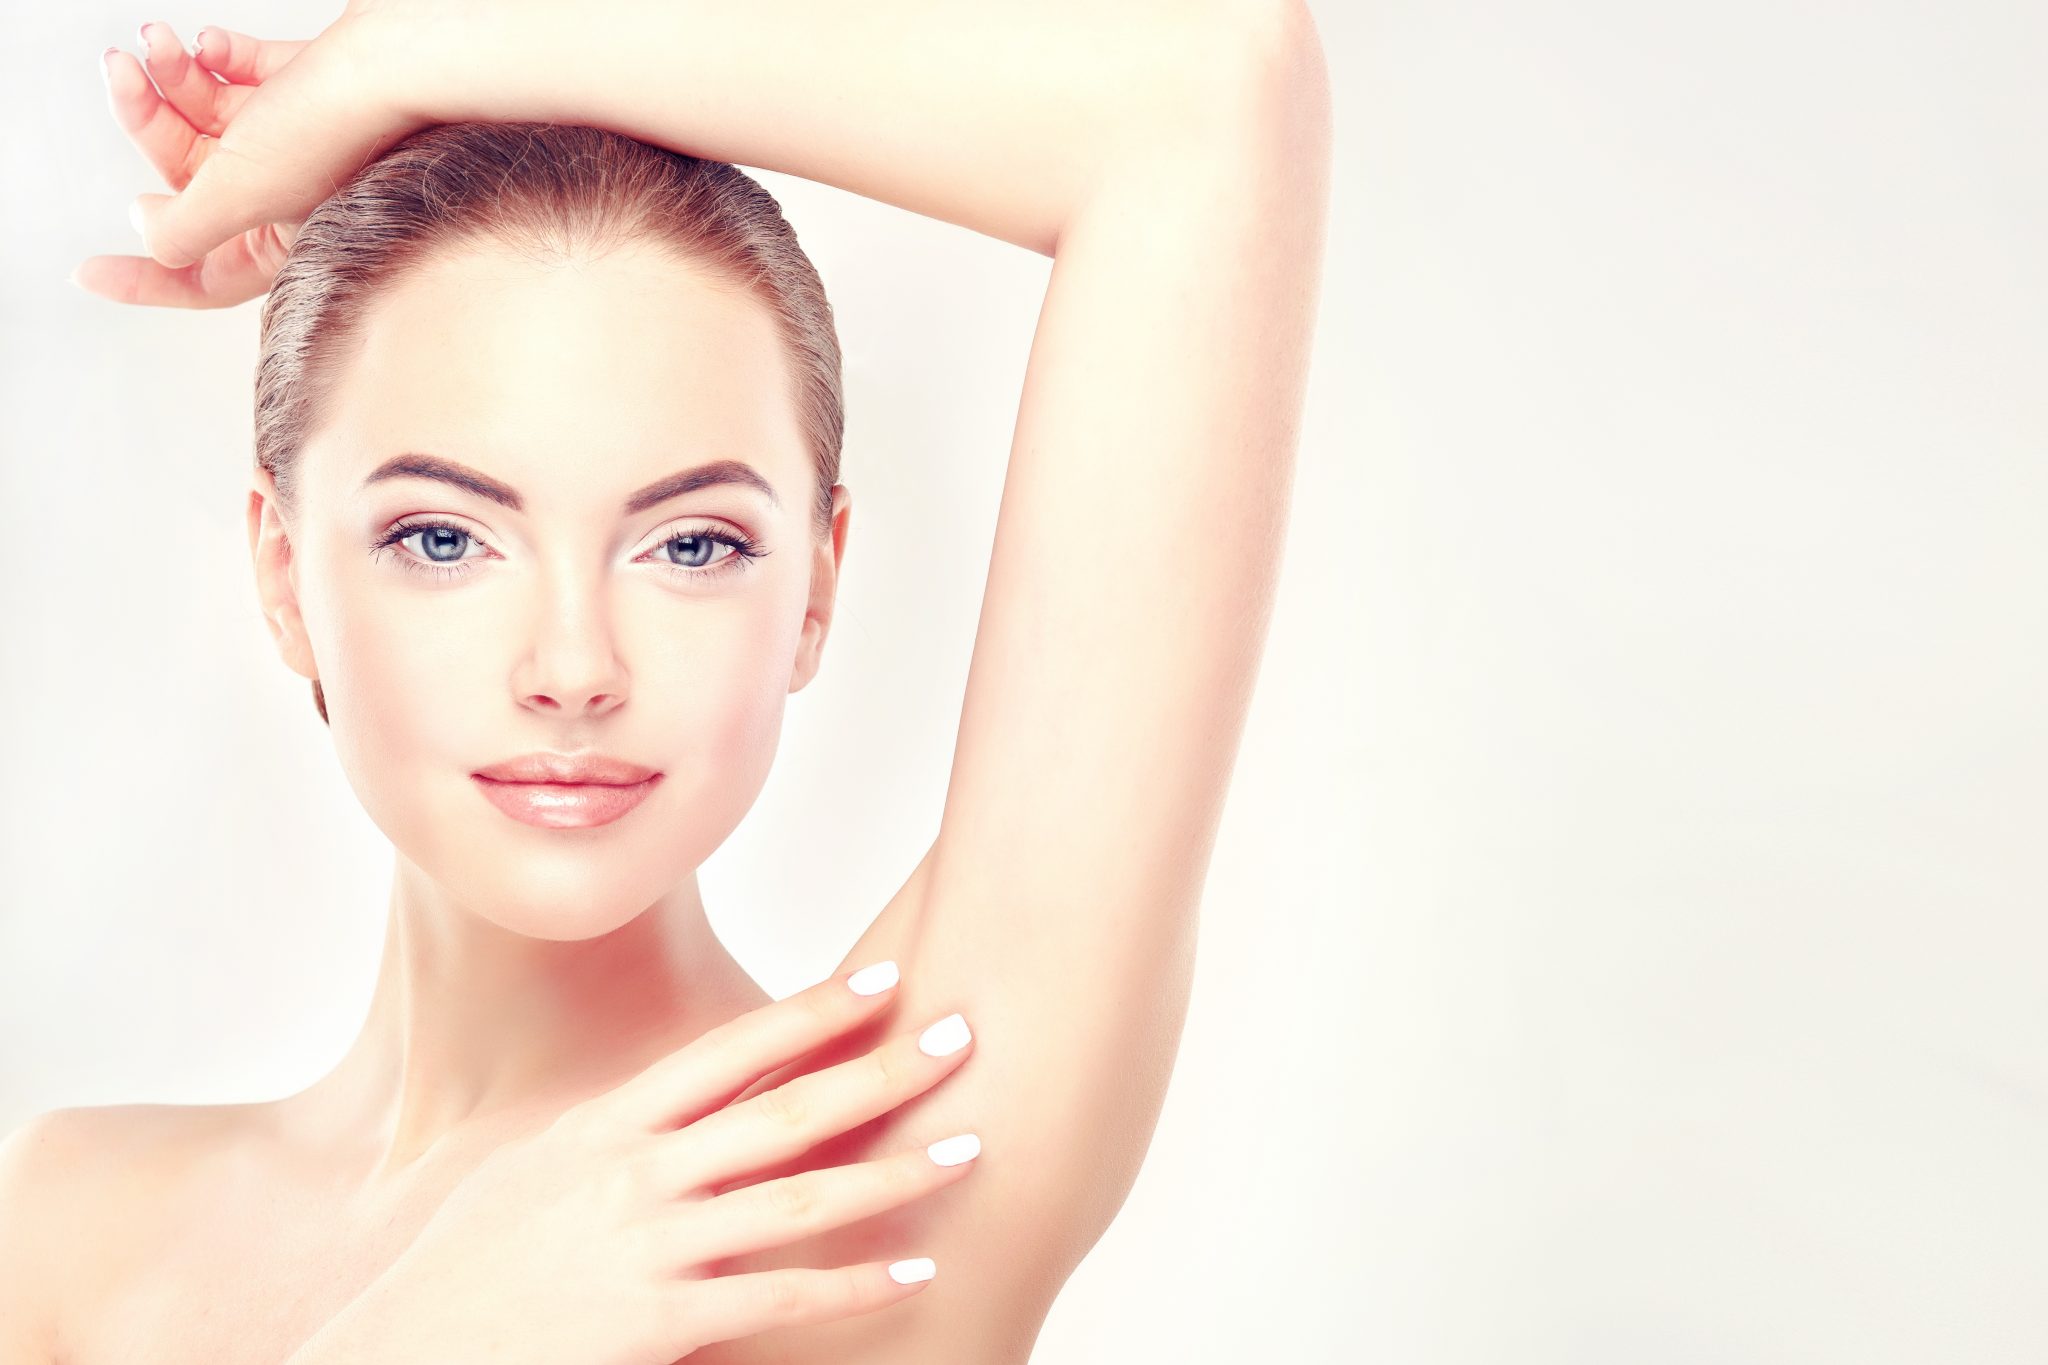 Laser Hair Removal: Can Women’s Body Hair Be Beautiful?